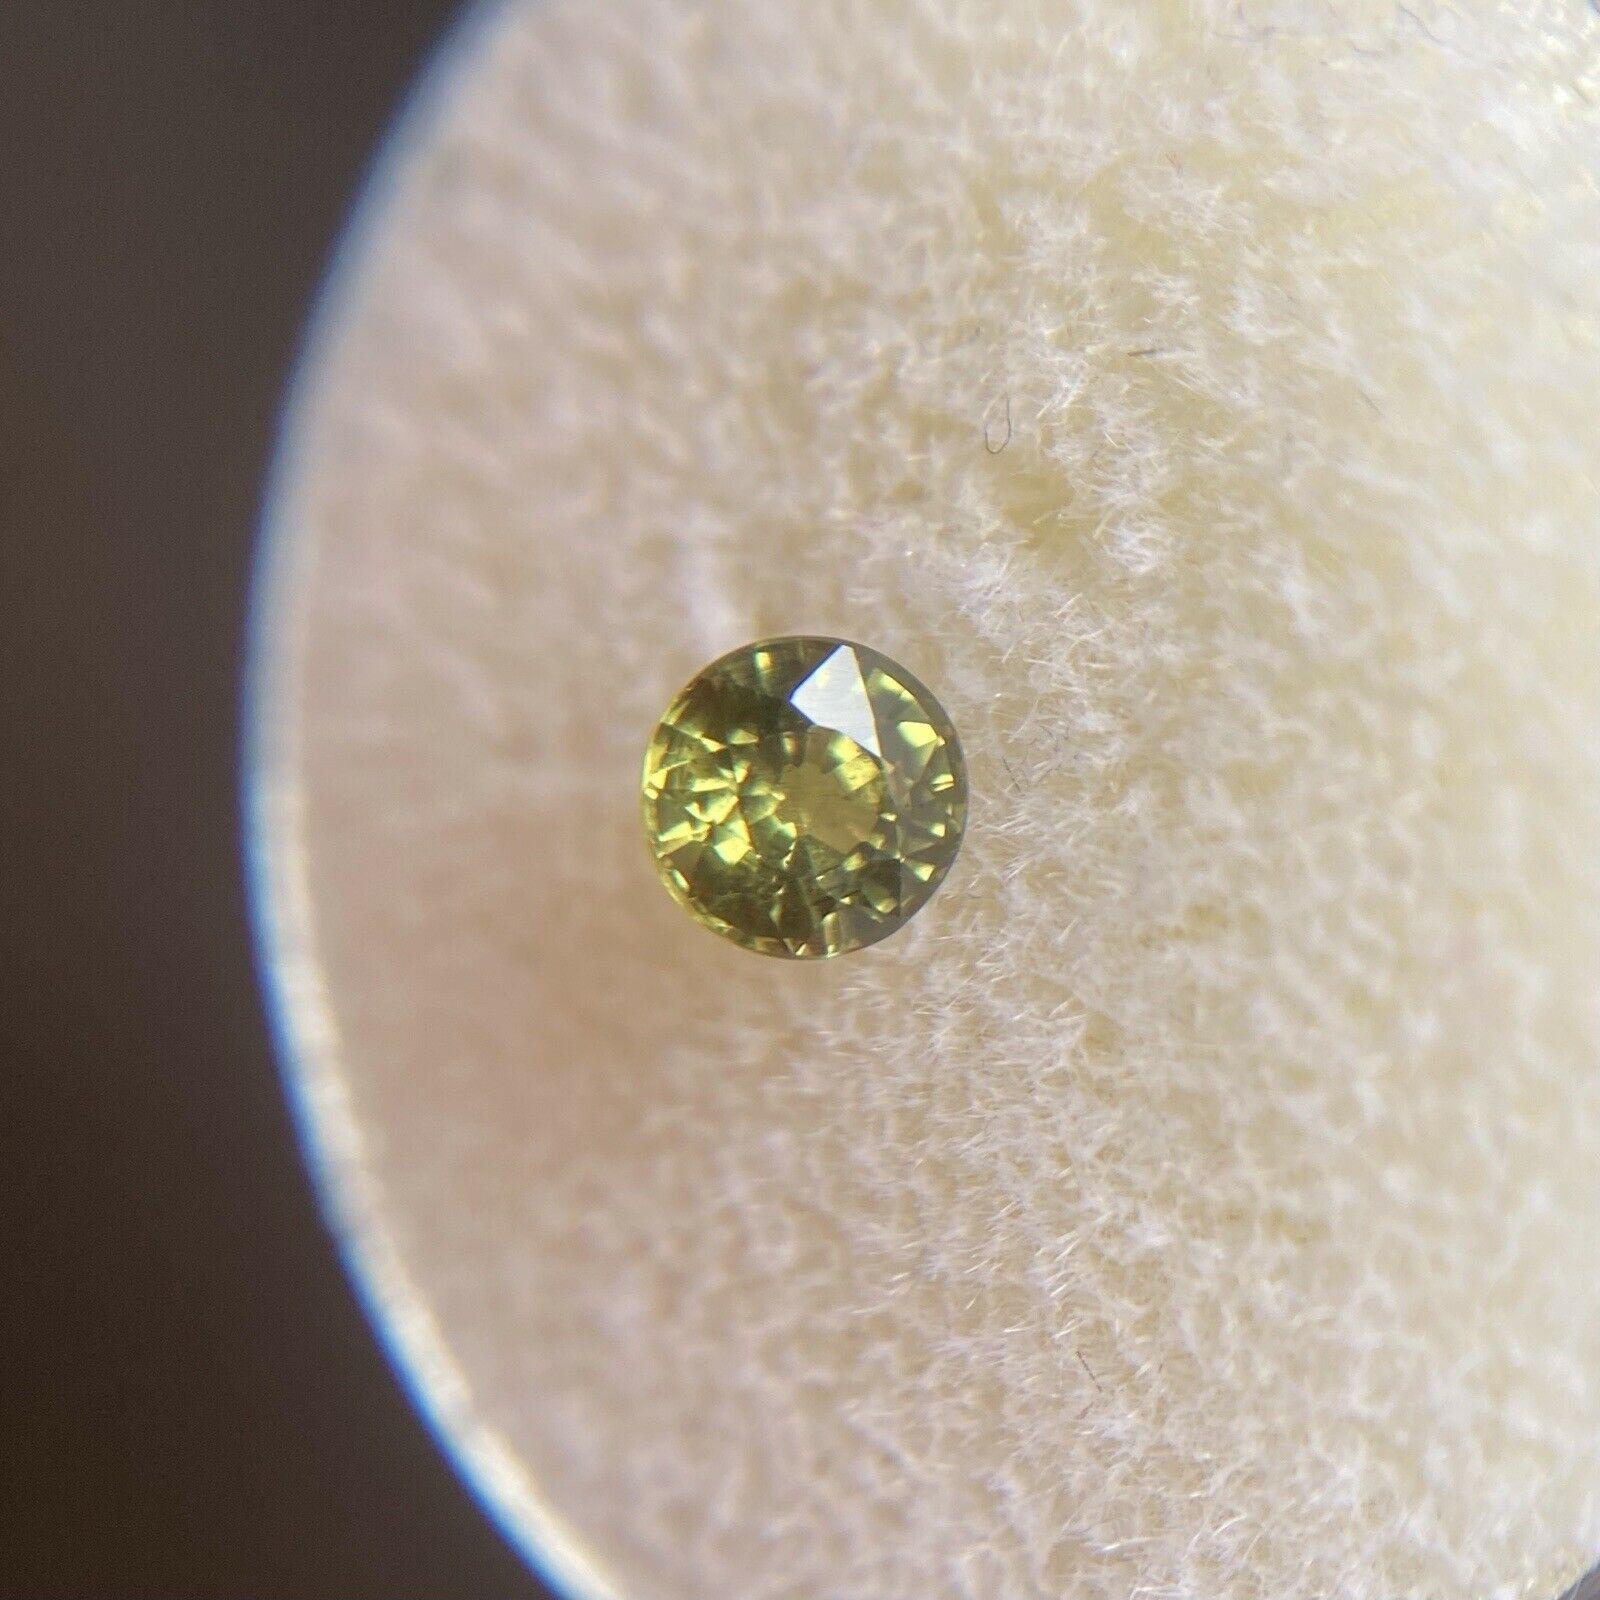 Australian Untreated Yellow Green Sapphire 0.53ct Round Cut Gem 4.4mm

Natural Australian Yellow Green Sapphire. 
0.53 Carat with a bright yellow green colour. Also has very good clarity, a clean stone with only some small natural inclusions